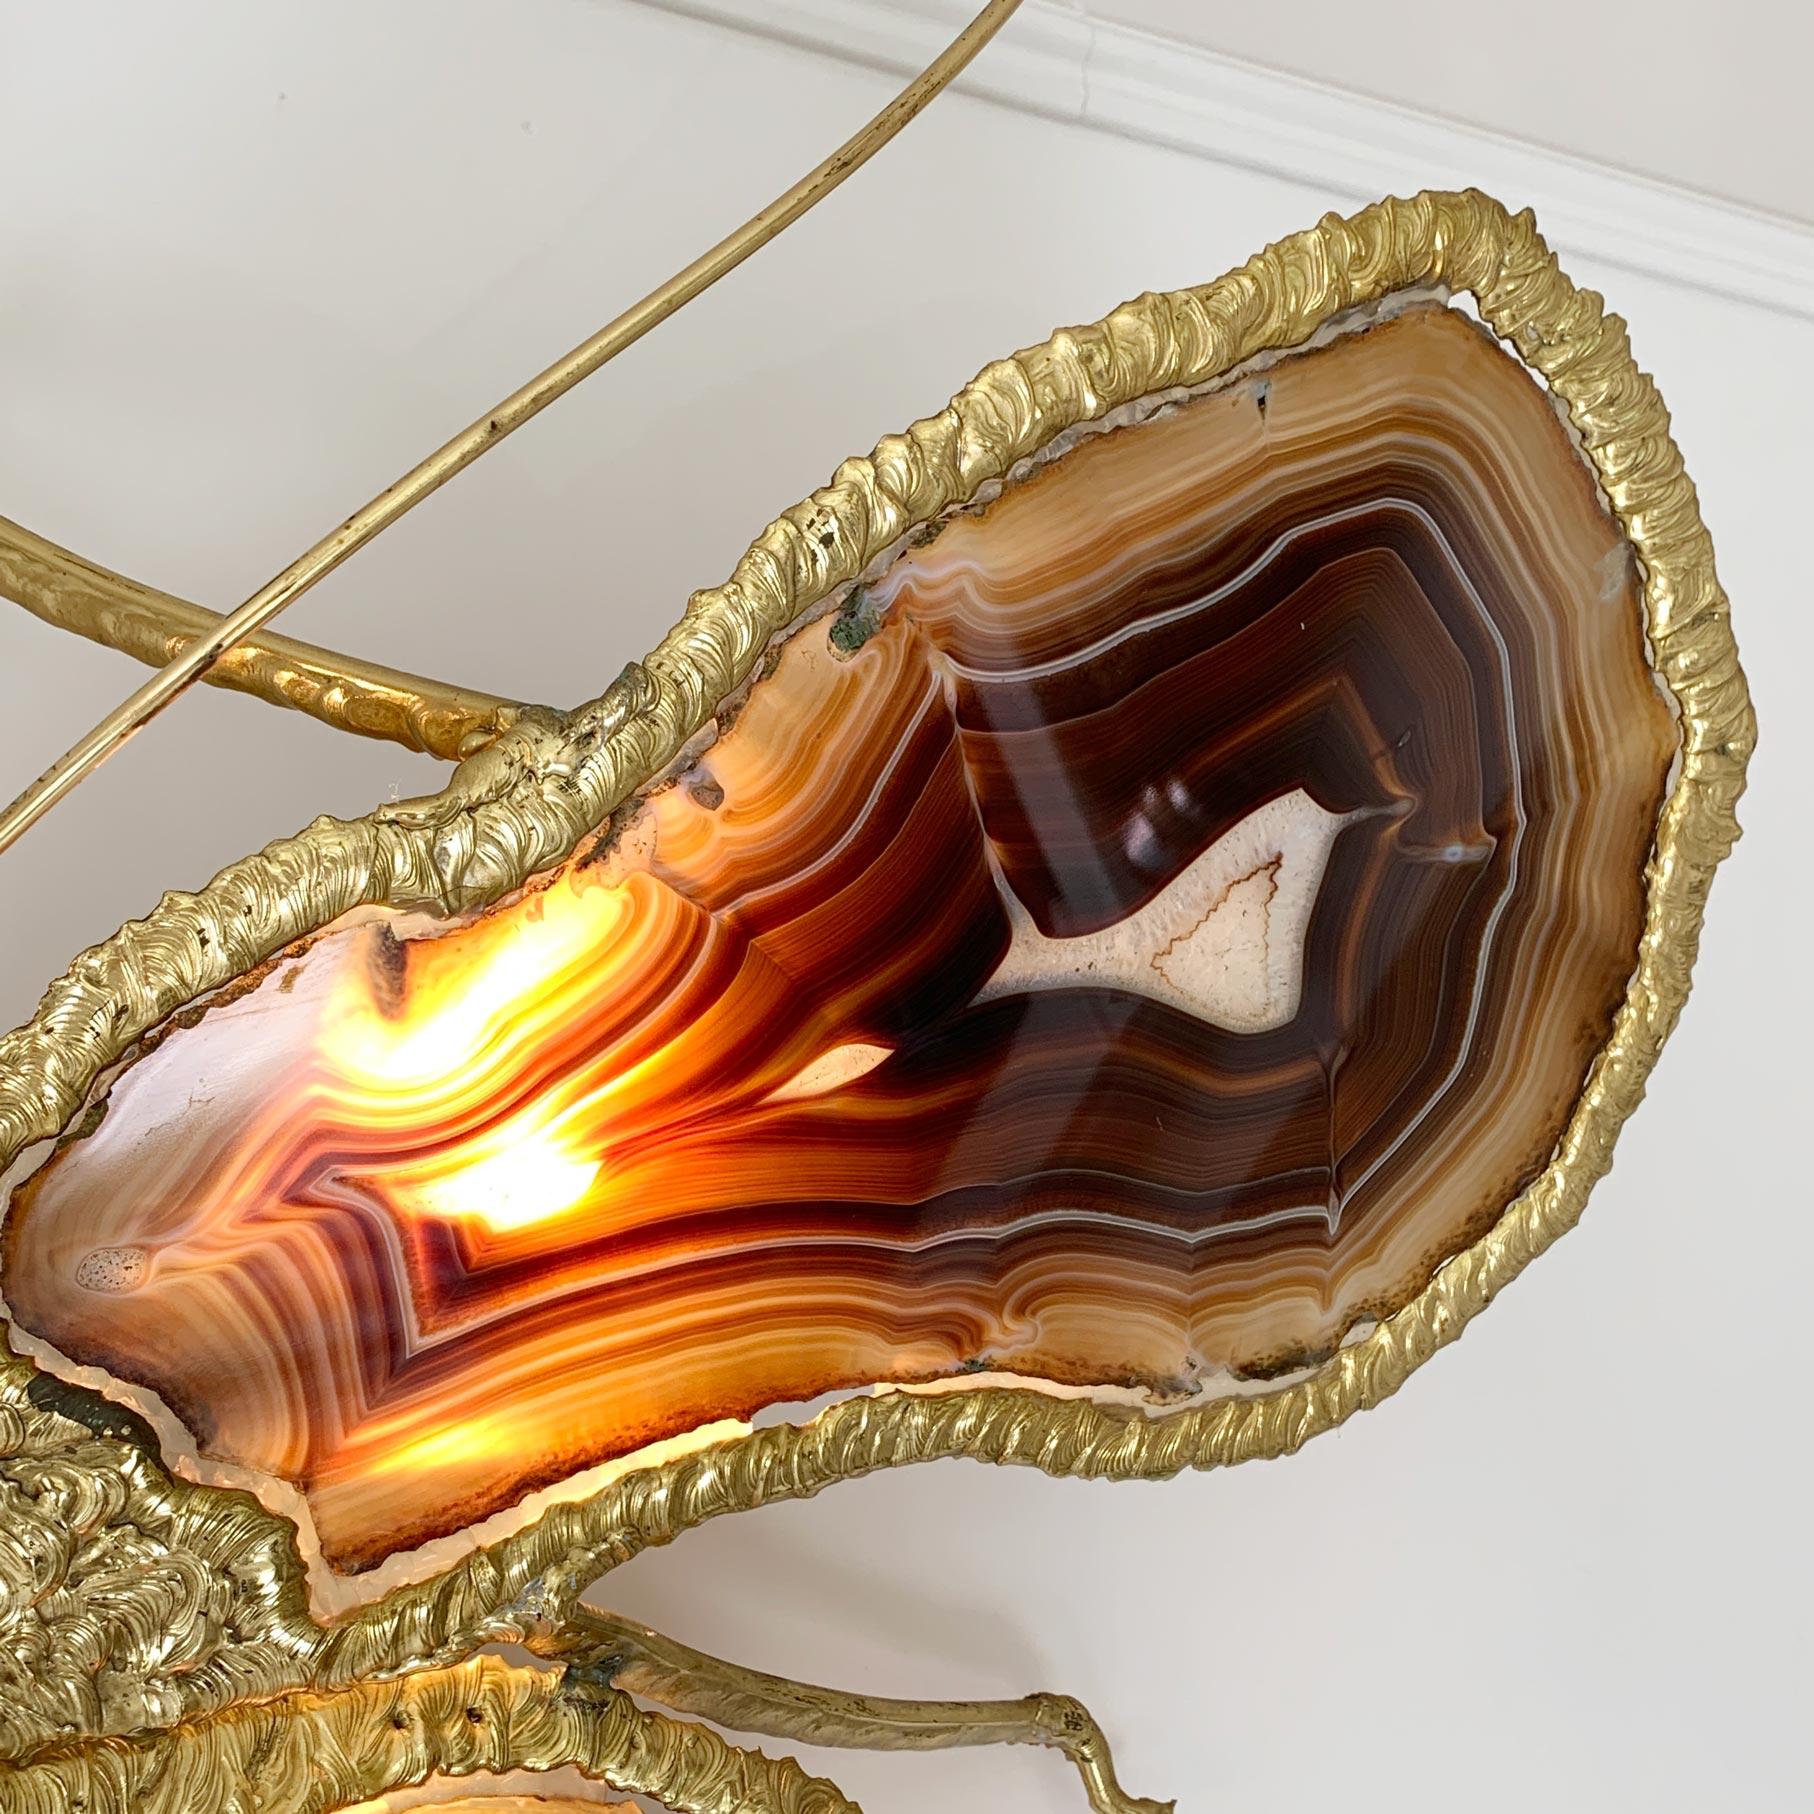 Hand-Crafted Isabelle Faure Signed Illuminated Gold Butterfly Sculpture in Brass and Agate For Sale